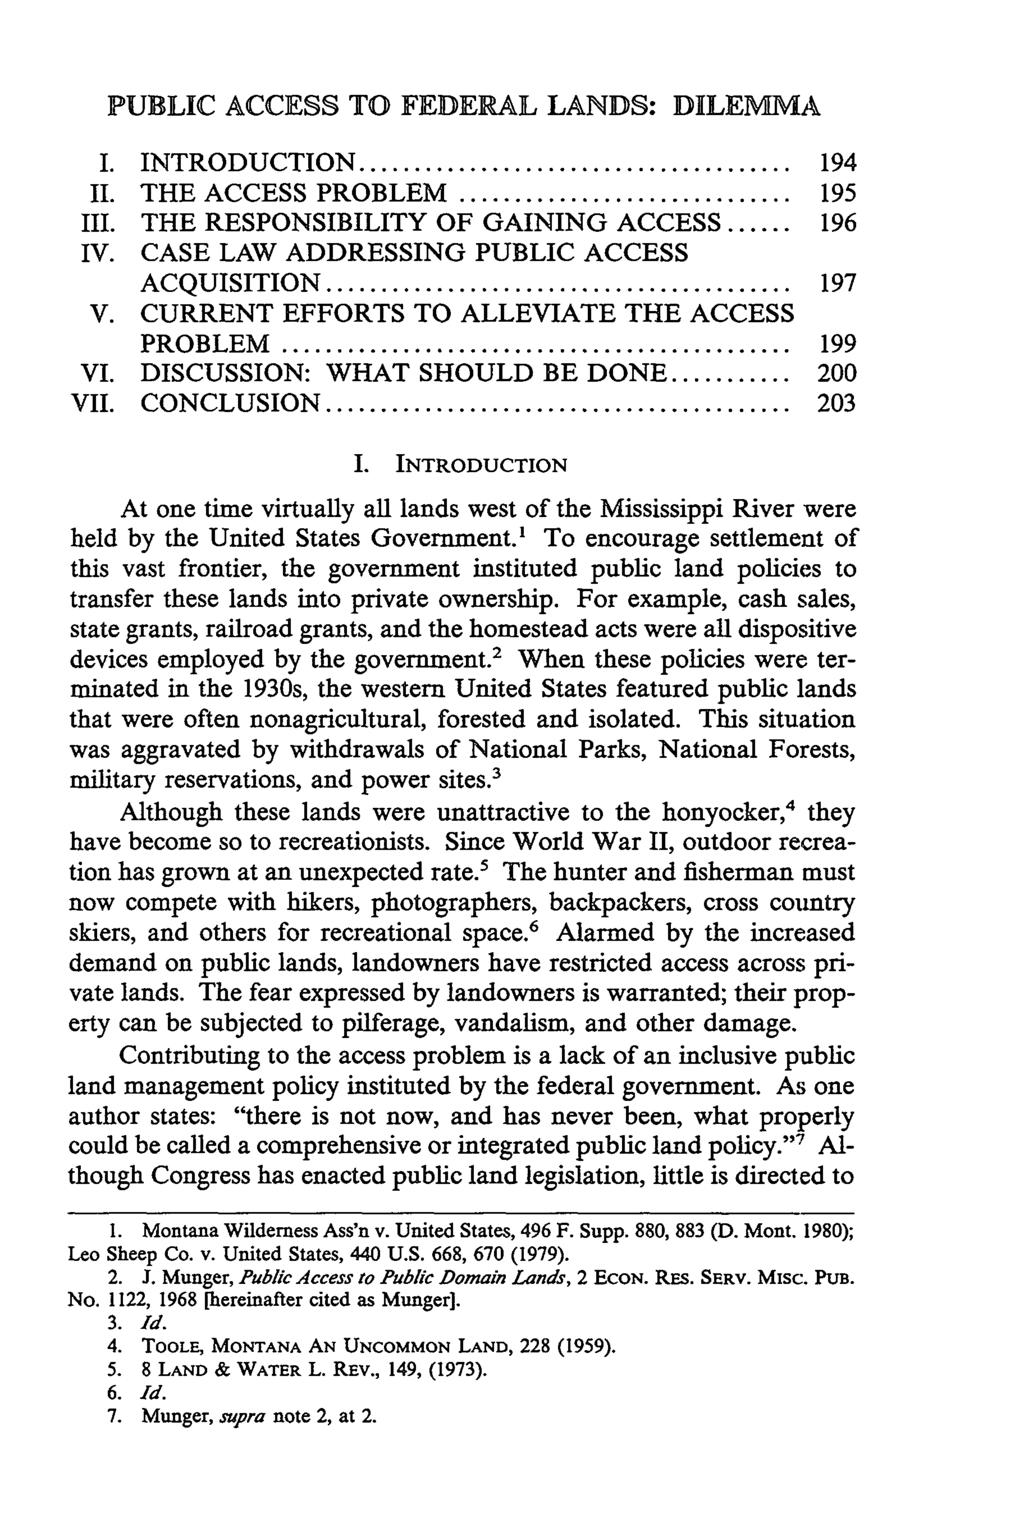 PUBLIC ACCESS TO FEDERAL LANDS: DILEMMA I. INTRODUCTION... 194 II. THE ACCESS PROBLEM... 195 III. THE RESPONSIBILITY OF GAINING ACCESS... 196 IV. CASE LAW ADDRESSING PUBLIC ACCESS ACQUISITION... 197 V.